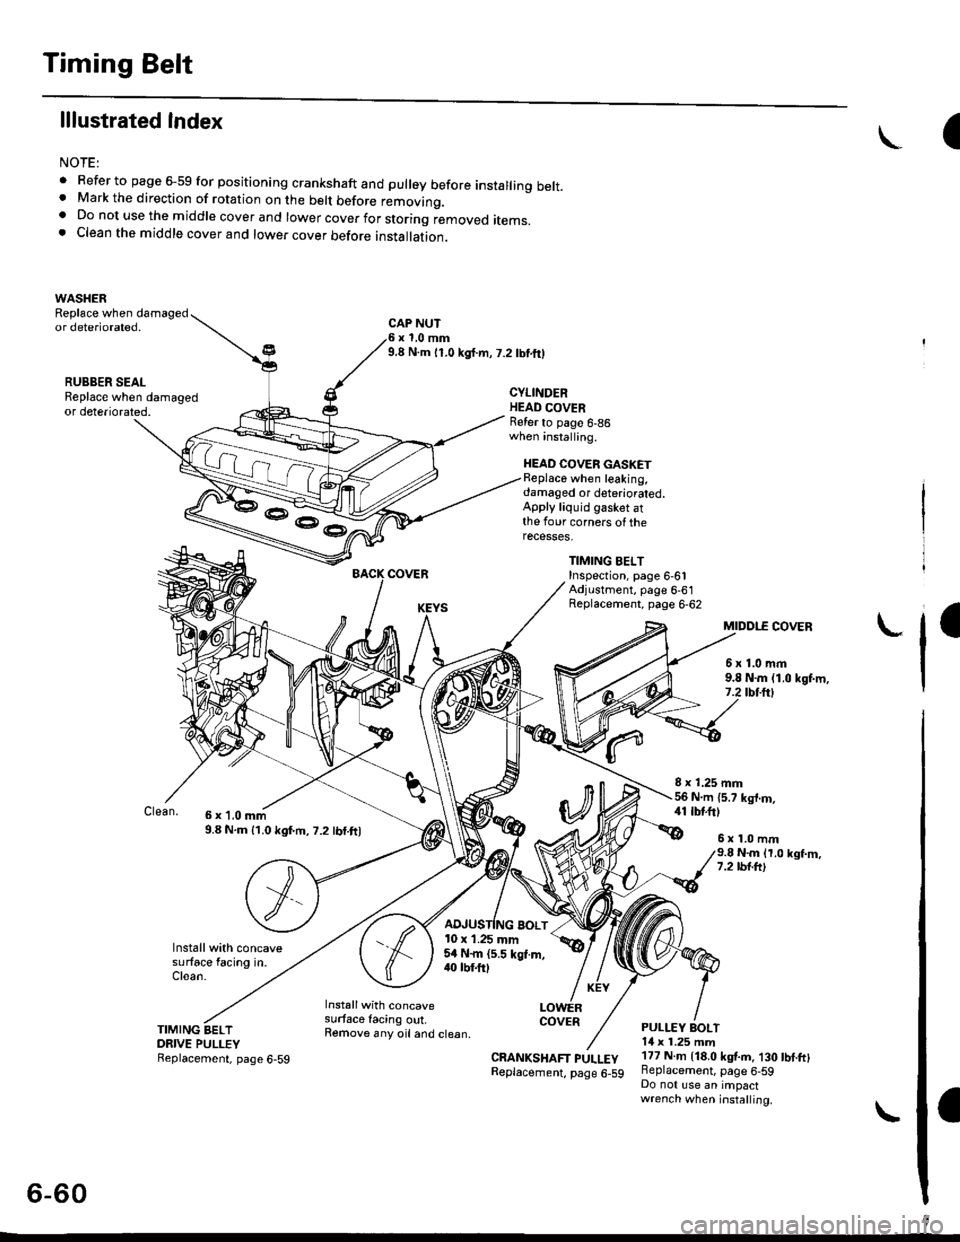 HONDA CIVIC 1996 6.G Owners Manual Timing Belt
lllustrated Index
NOTE:
. Refer to page 6-59 for positioning crankshaft and pulley before installing belt.. Mark the direction of rotation on the belt before removino.a Do not use the midd